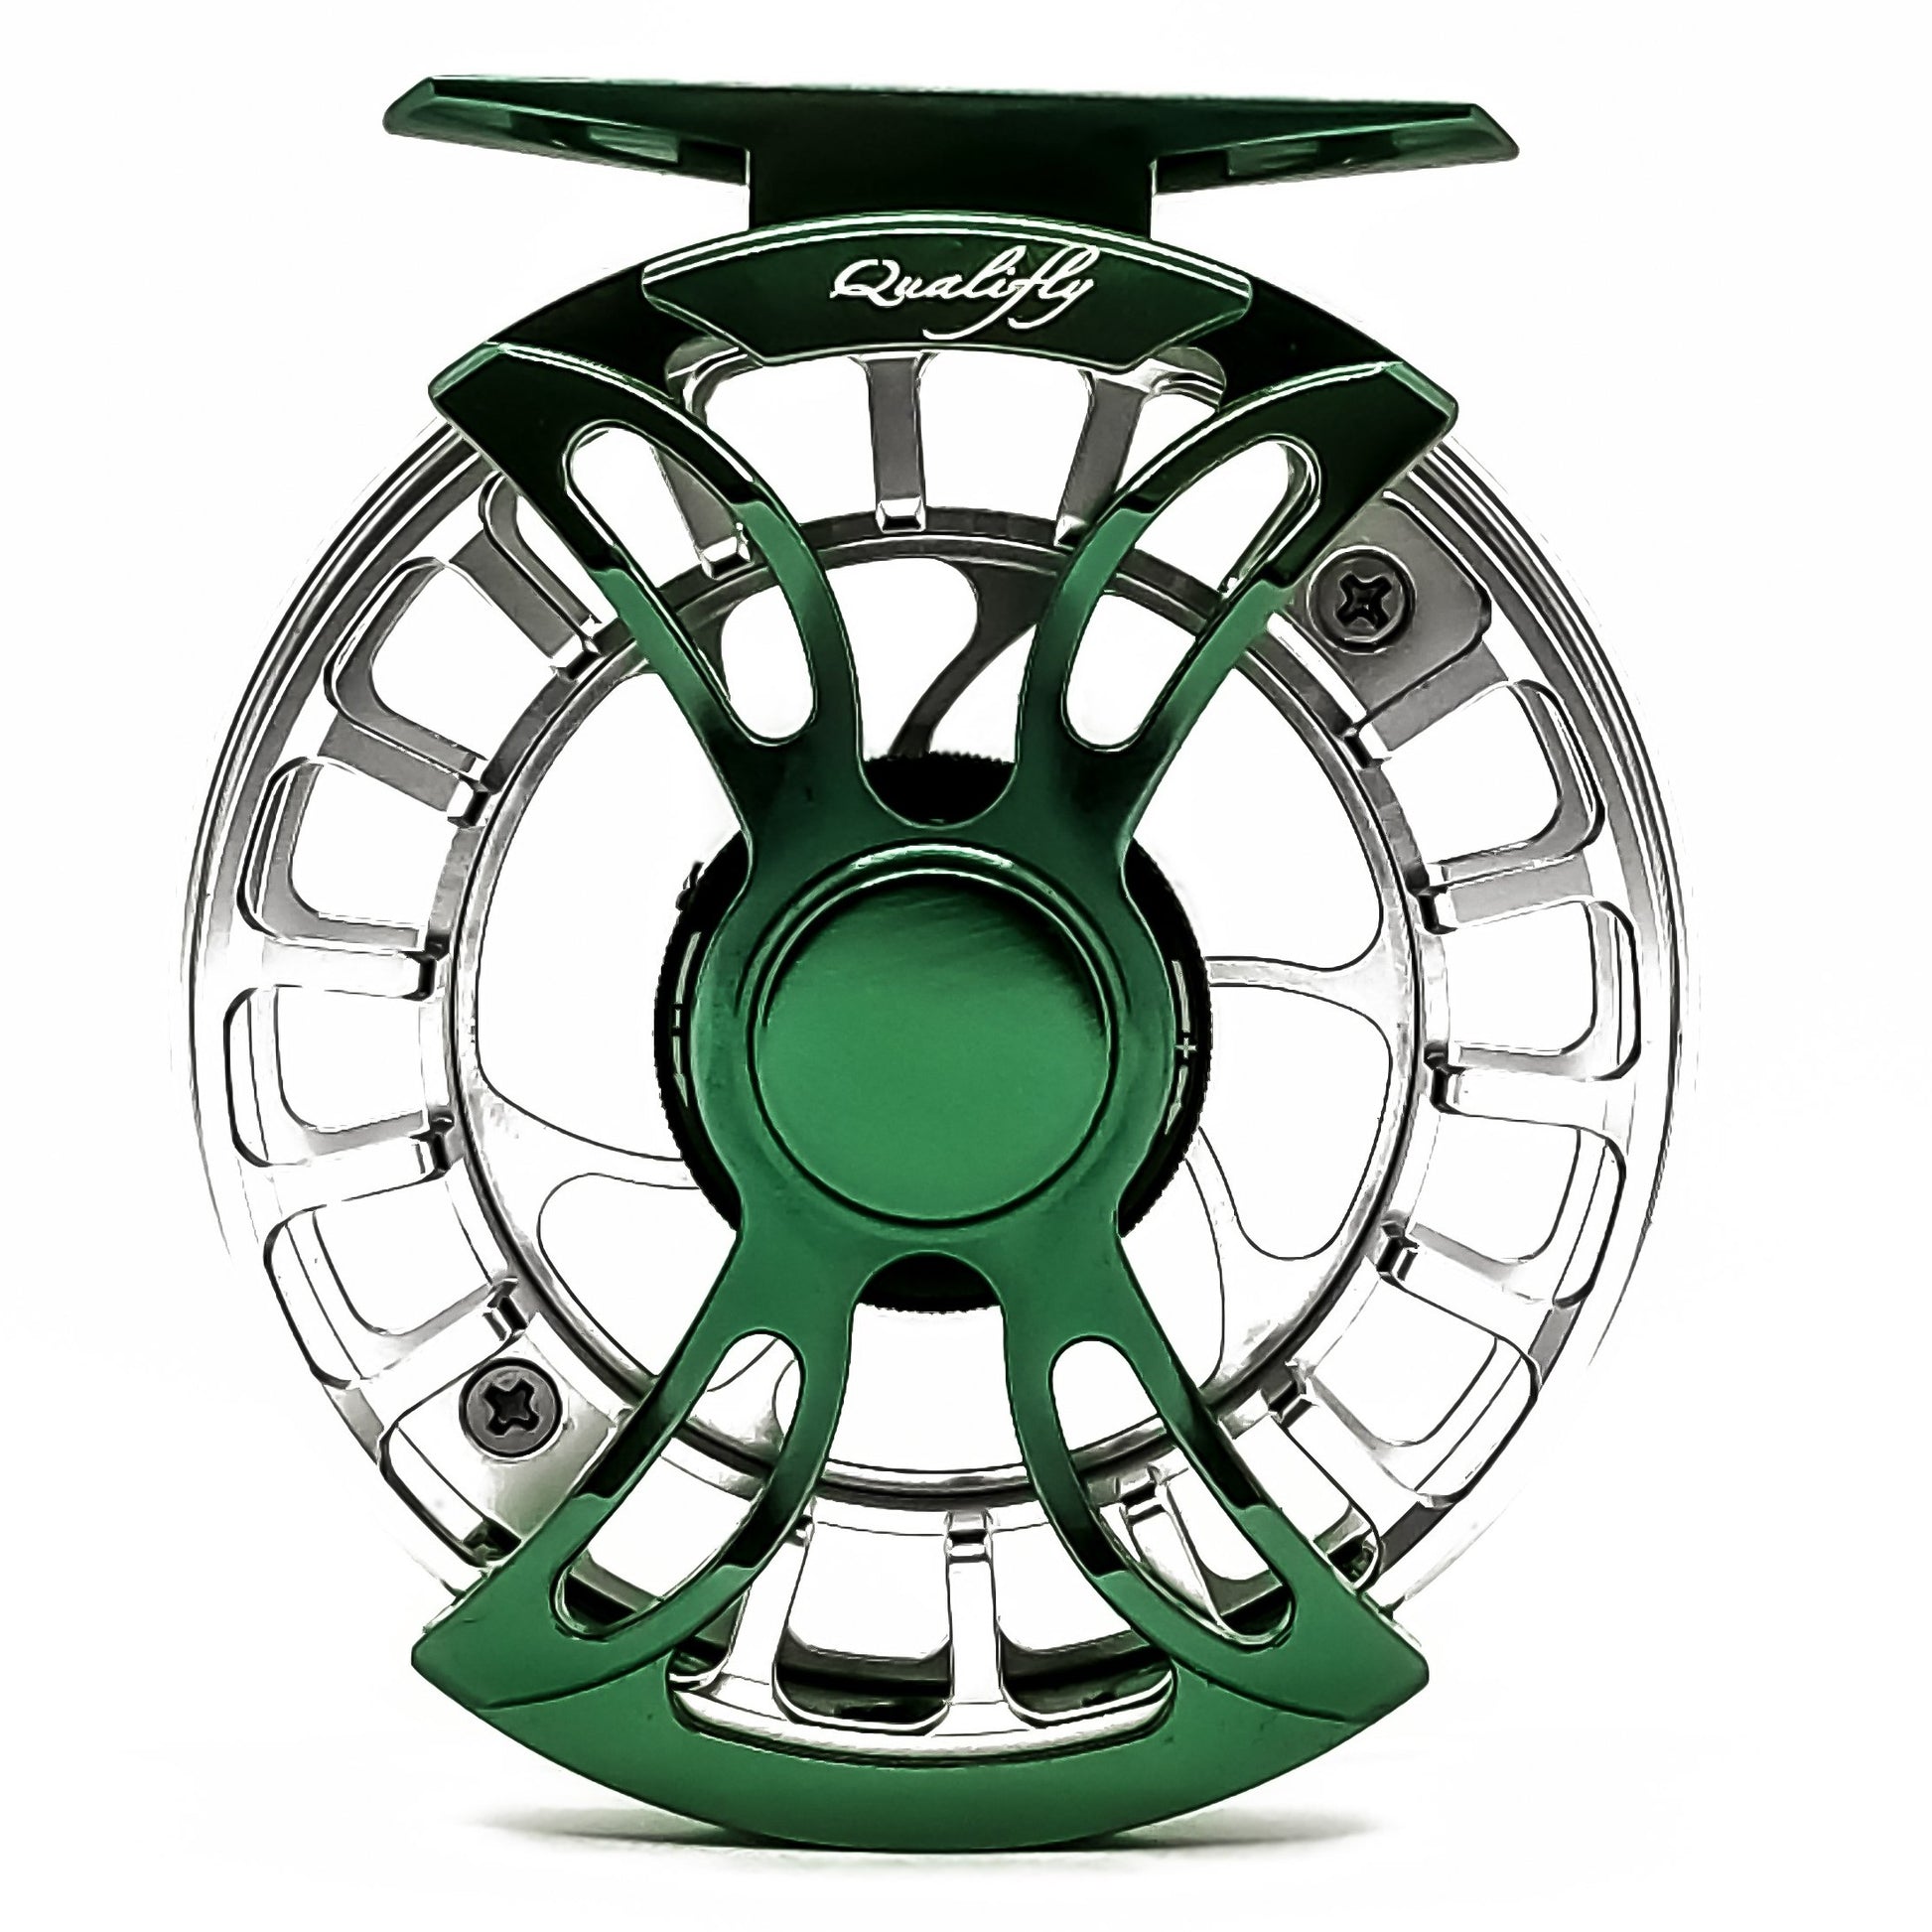 Superfly 4/5/6 Fly Reel Kit with Line, Pre-Spooled, Reversible